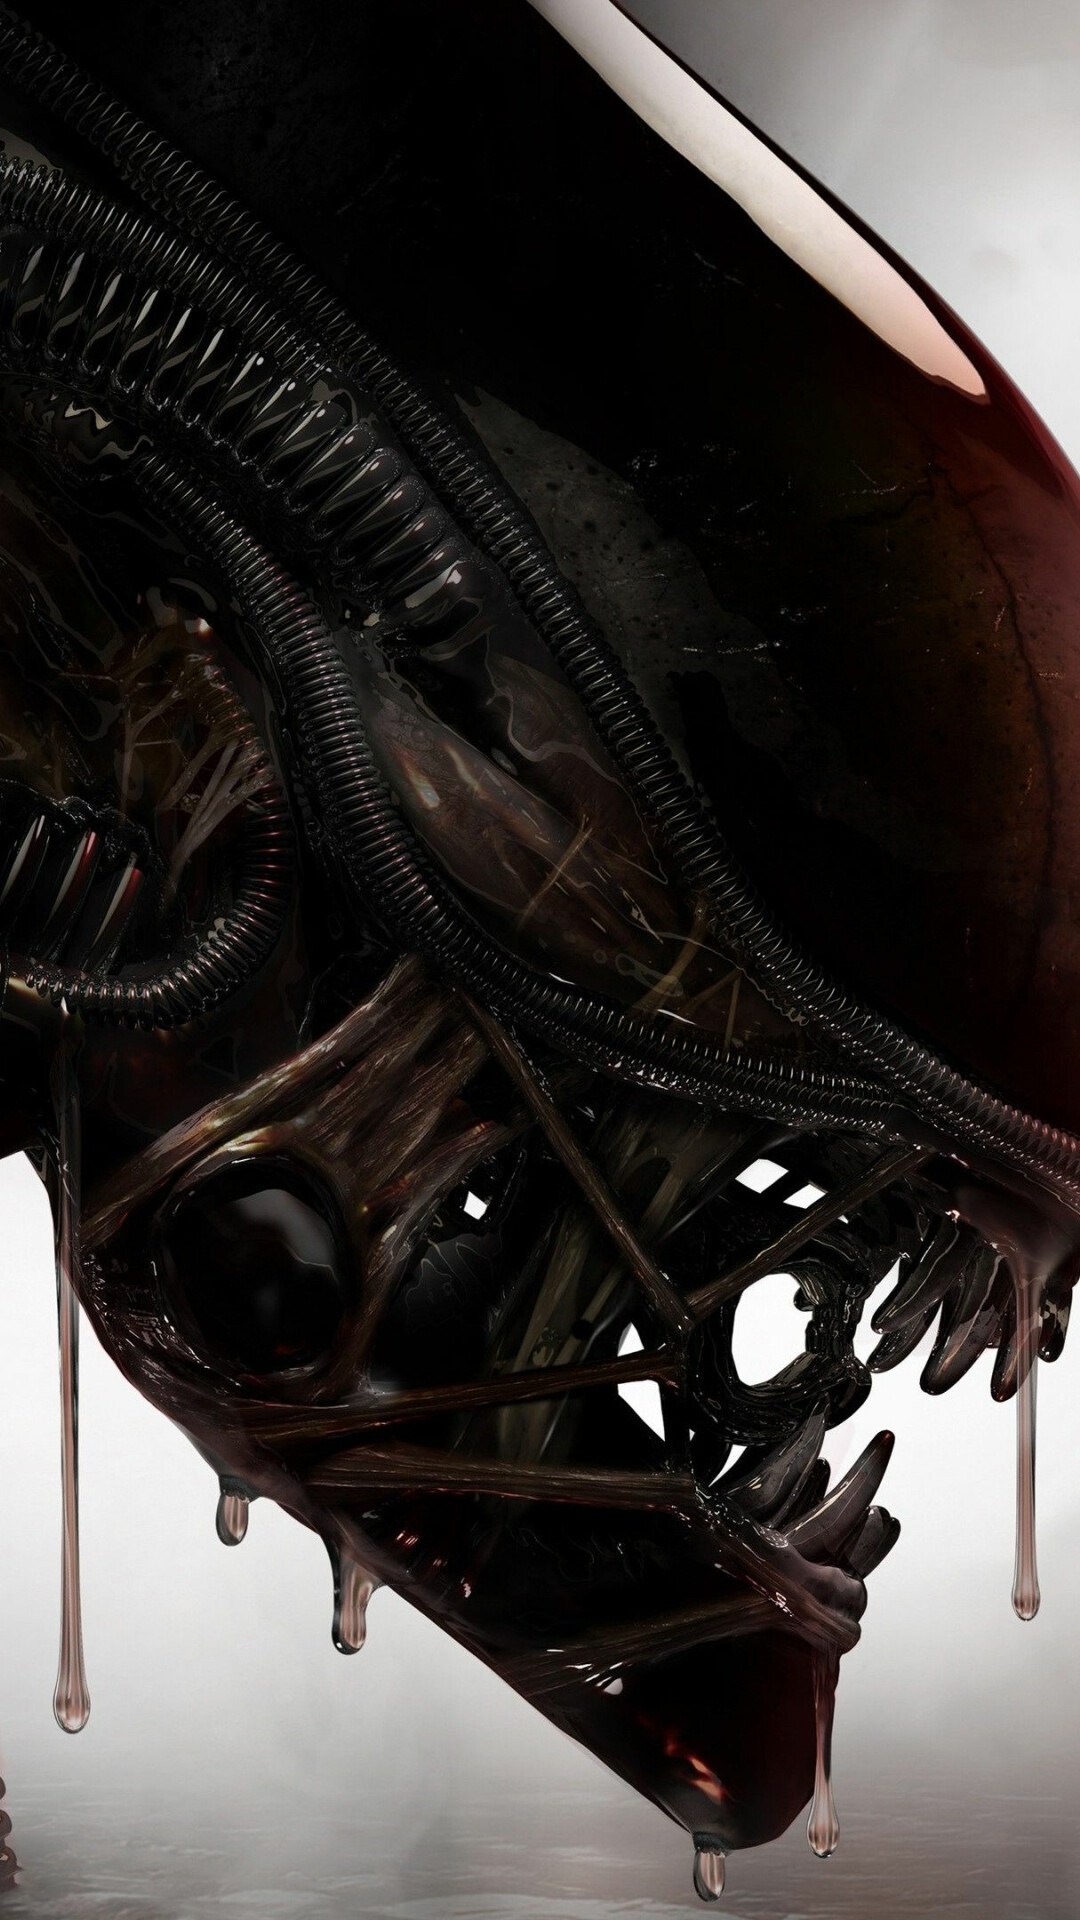 Alien (Movie): A fictional endoparasitoid extraterrestrial species that serves as the titular antagonist of the film series. 1080x1920 Full HD Background.